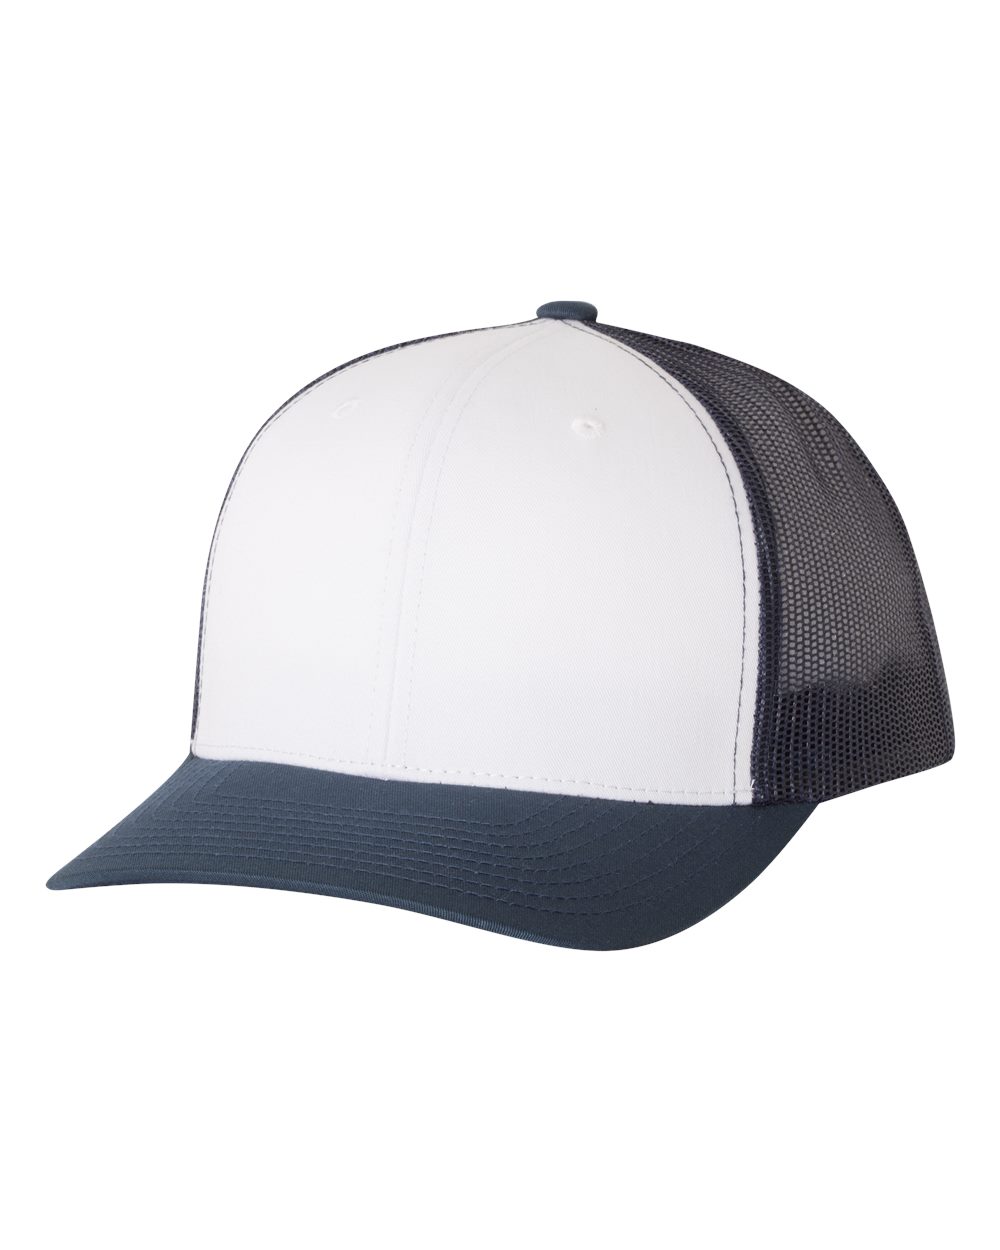 click to view Navy/ White/ Navy